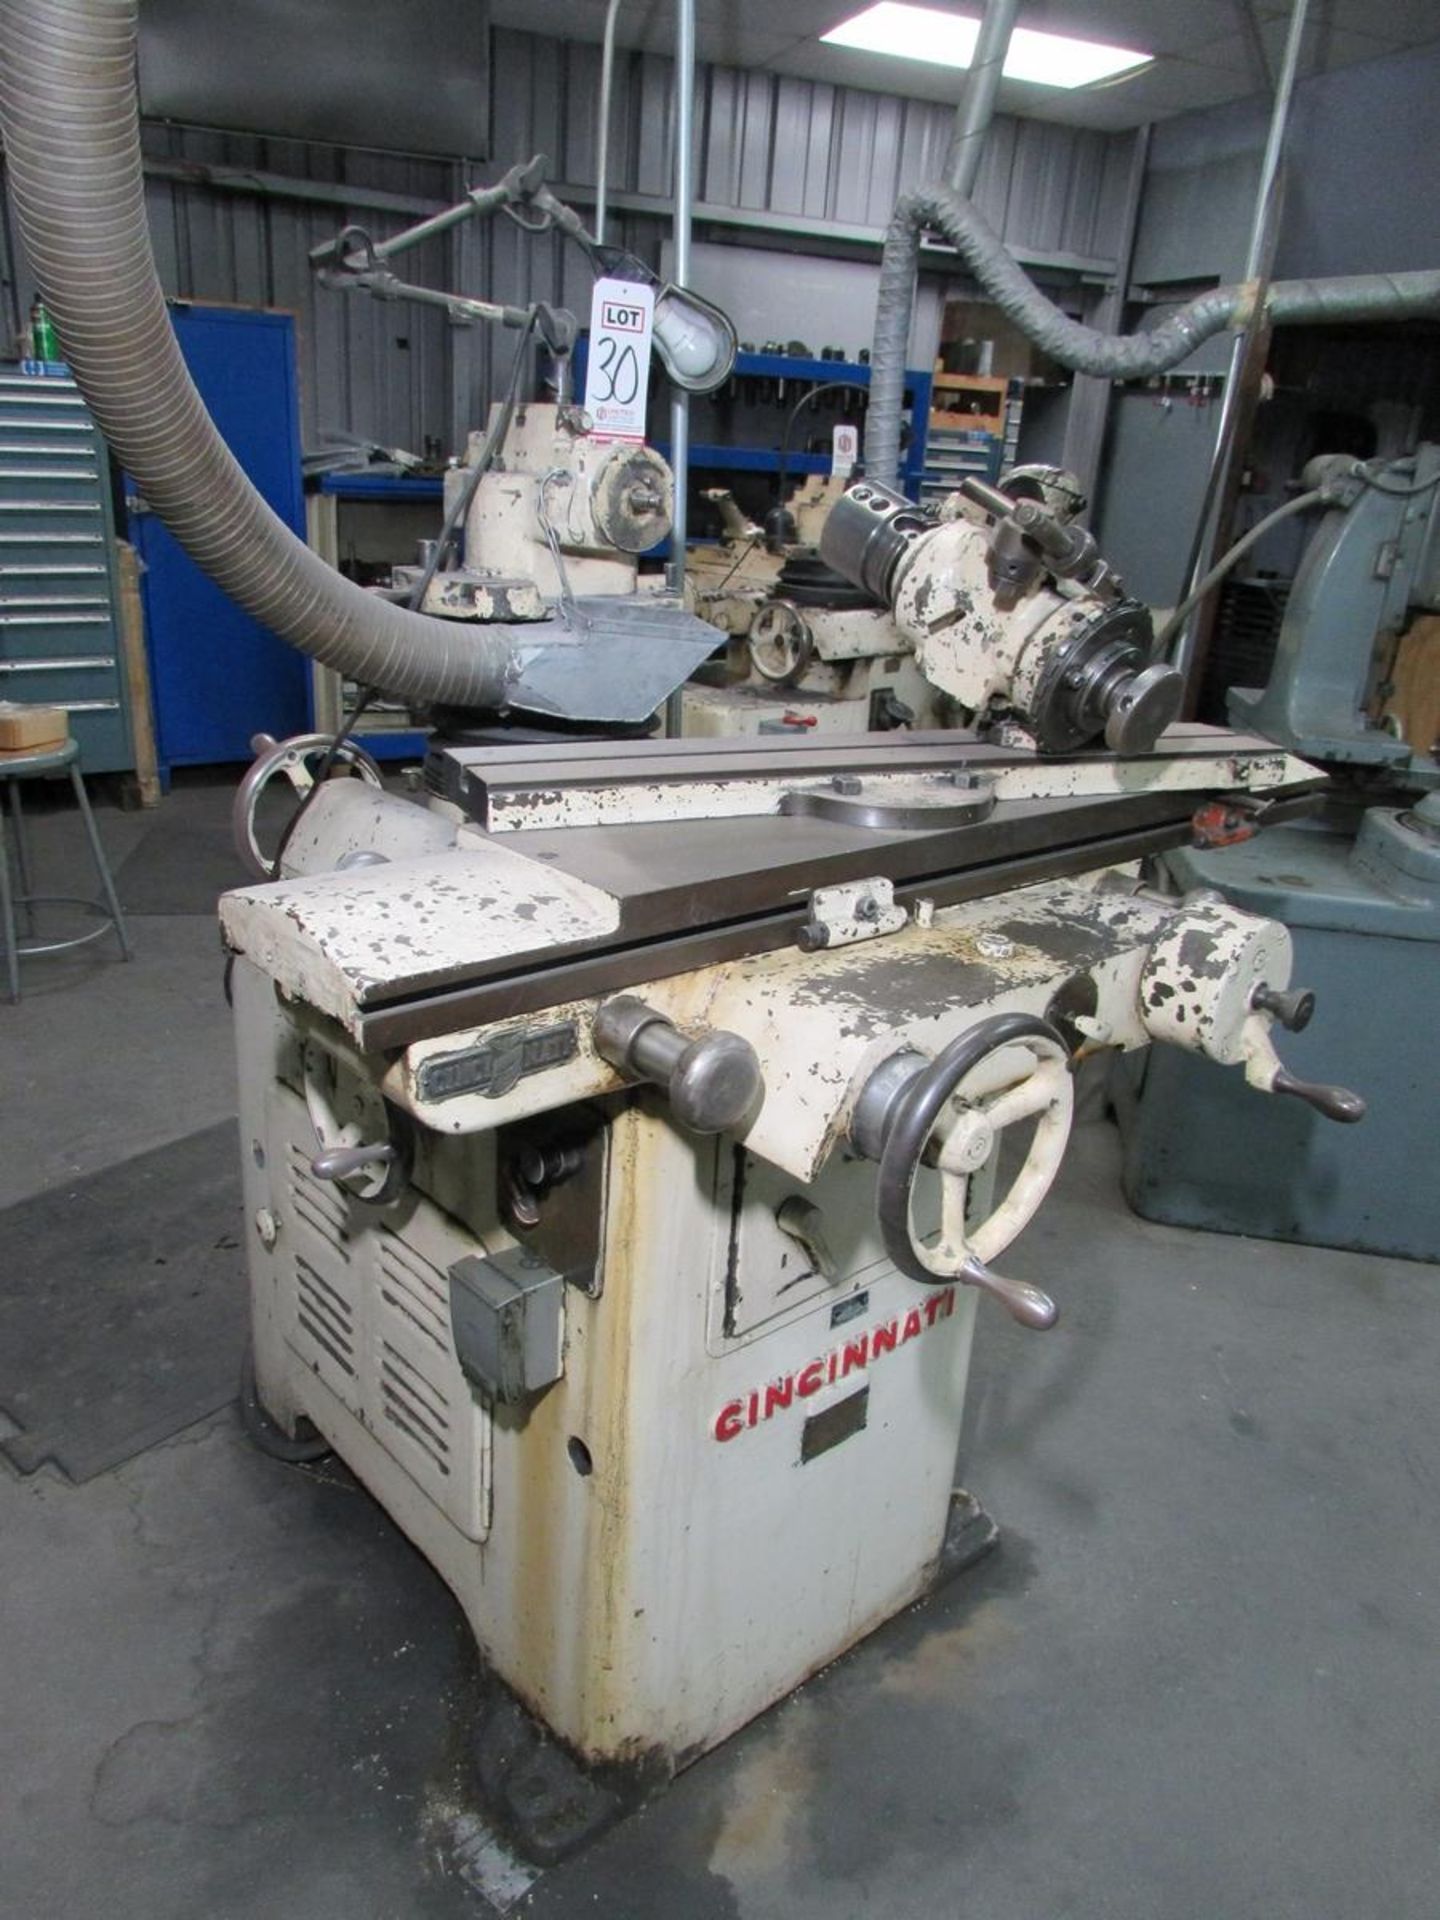 CINCINNATI UNIVERSAL CUTTER AND TOOL GRINDER, MODEL NO. 2, 36" X 5-1/4" T-SLOTTED TABLE, WORKHEAD